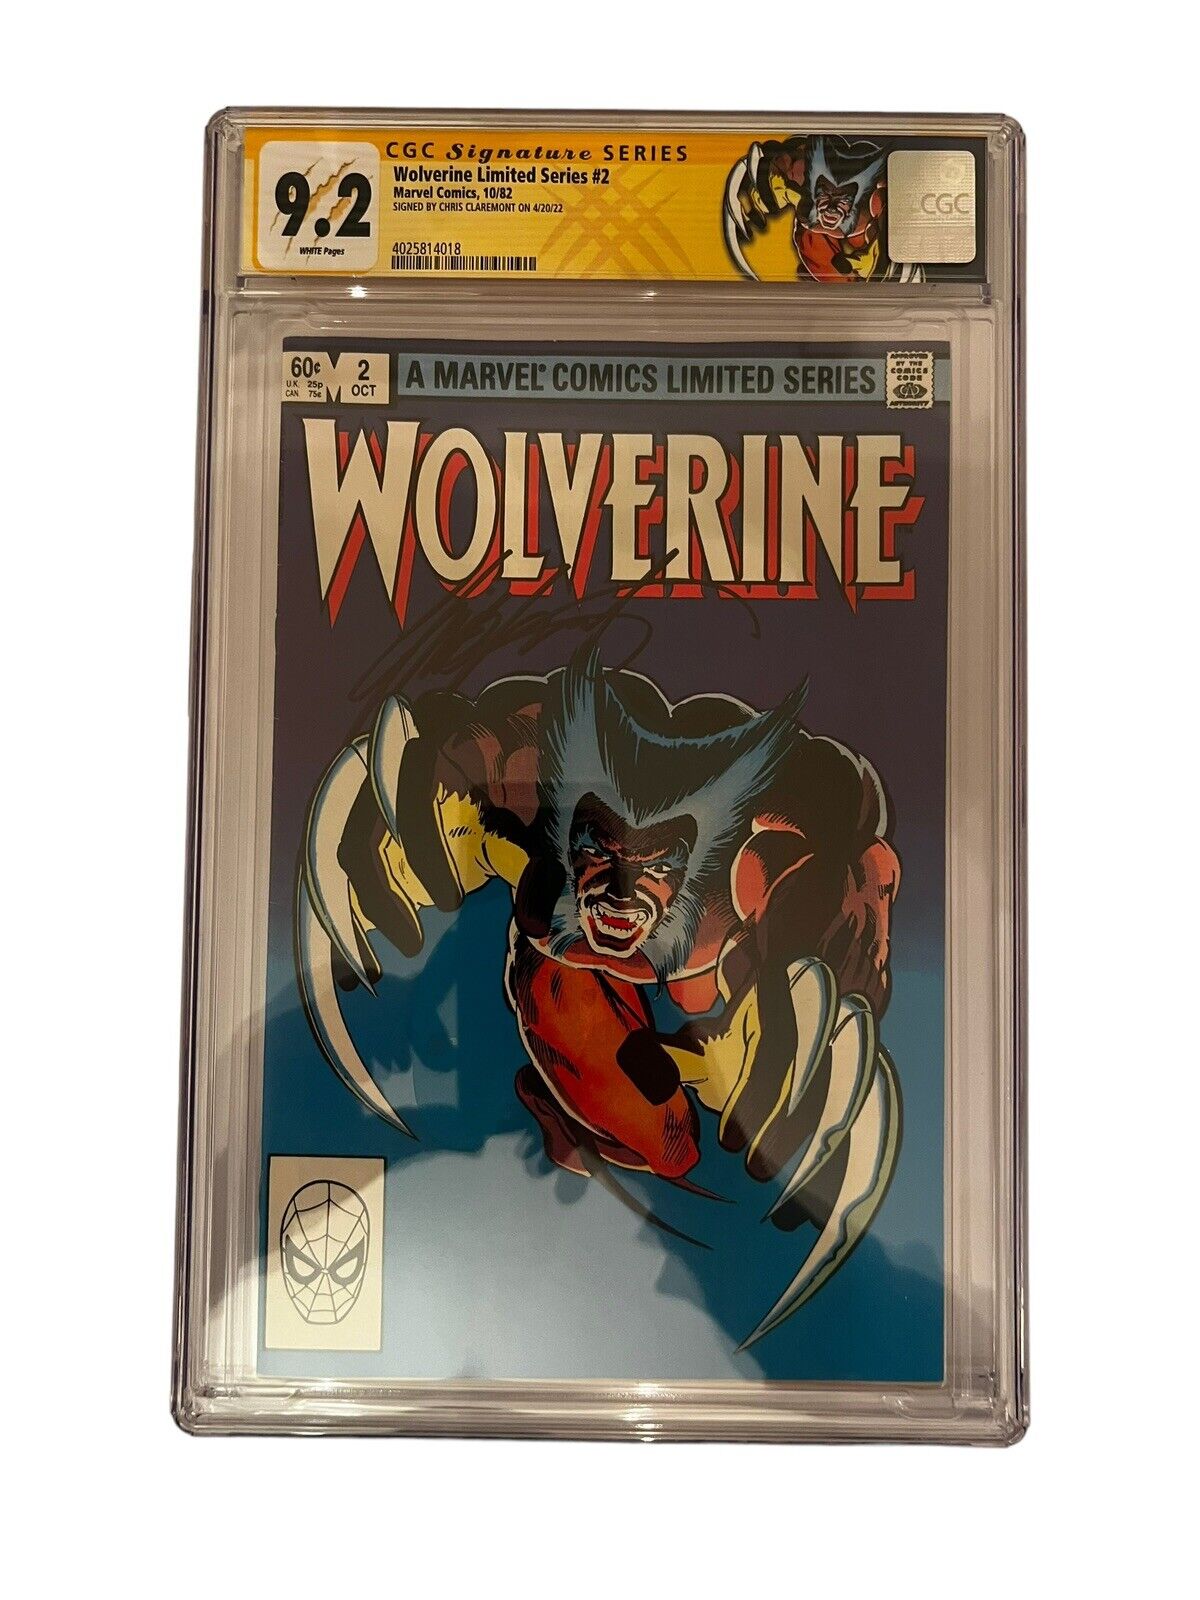 WOLVERINE LIMITED SERIES #2 CGC SS 9.2  - SIGNED BY CHRIS CLAREMONT